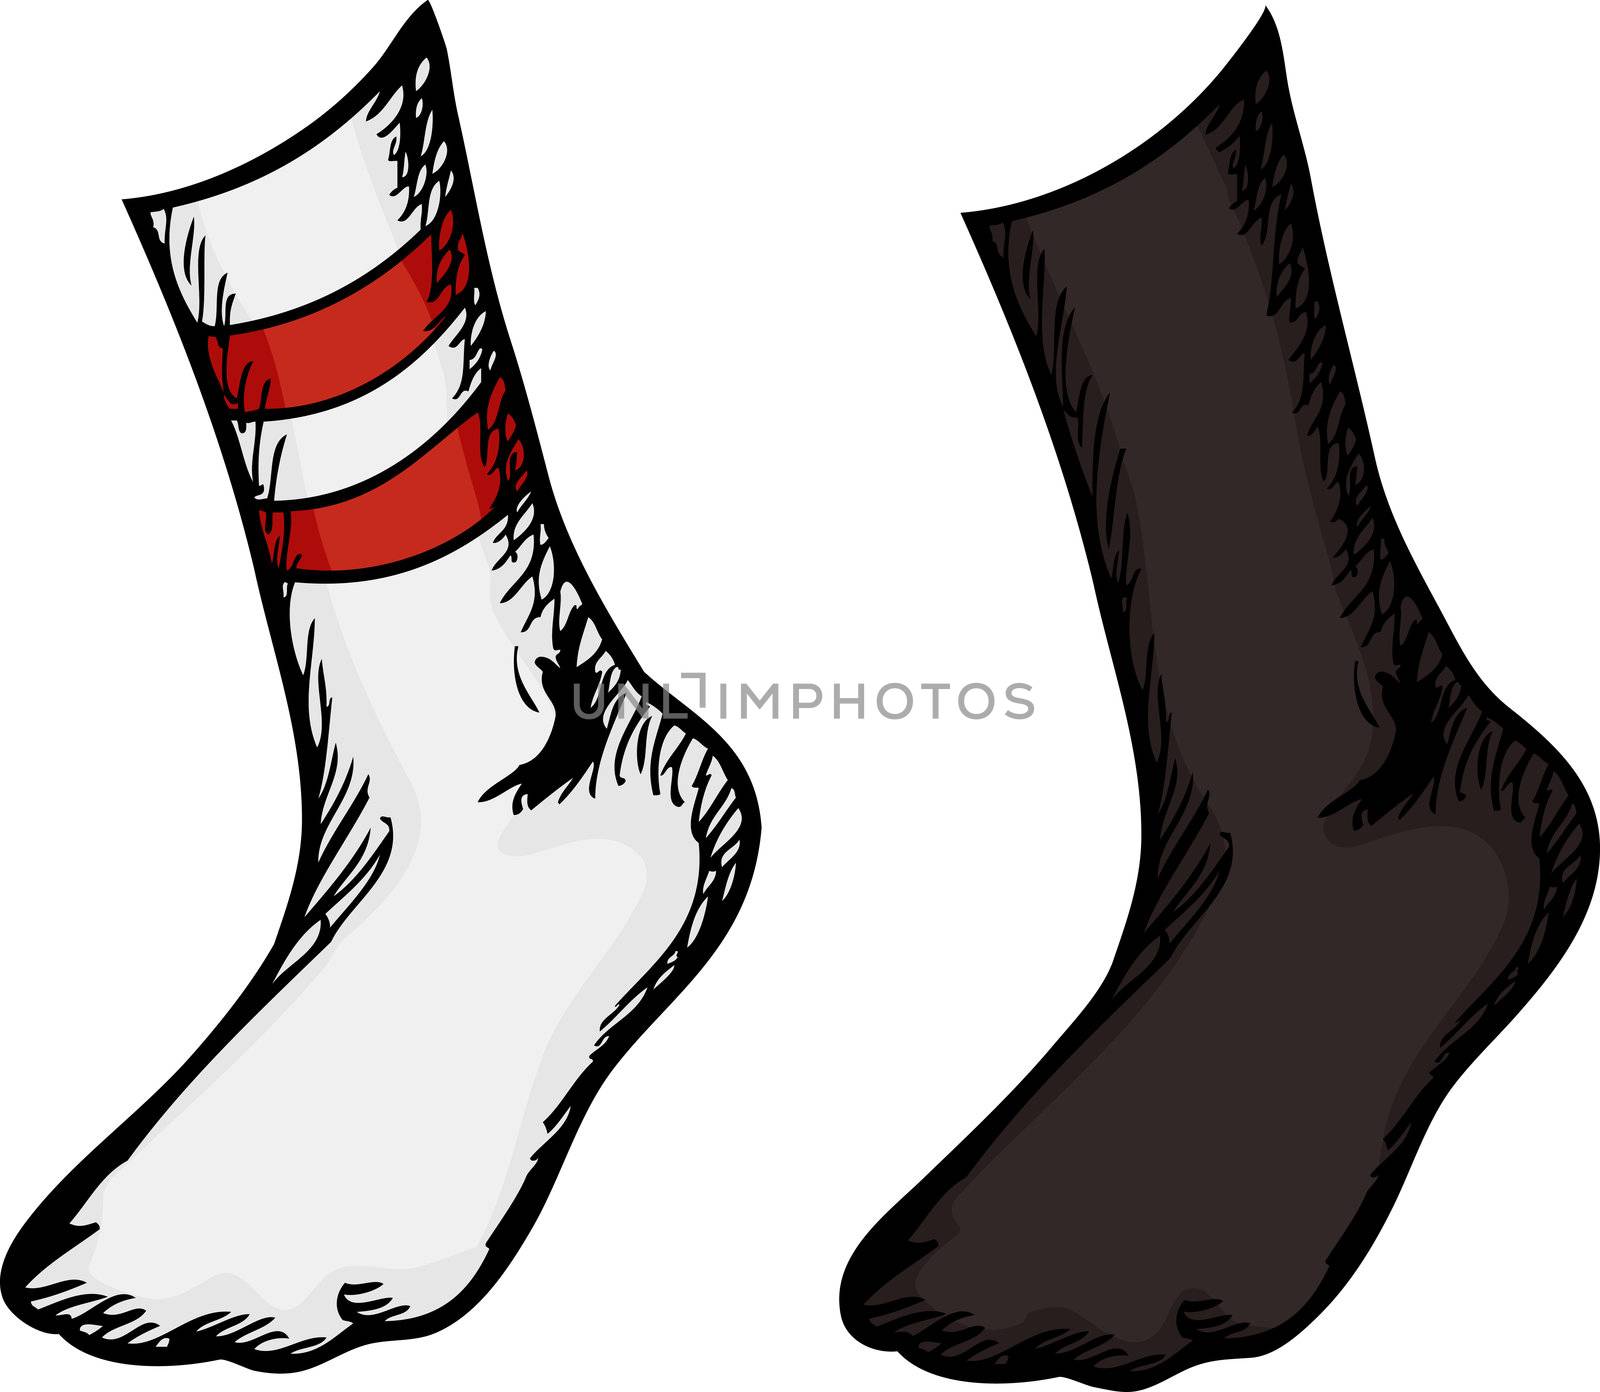 Isolated feet with different socks over white background